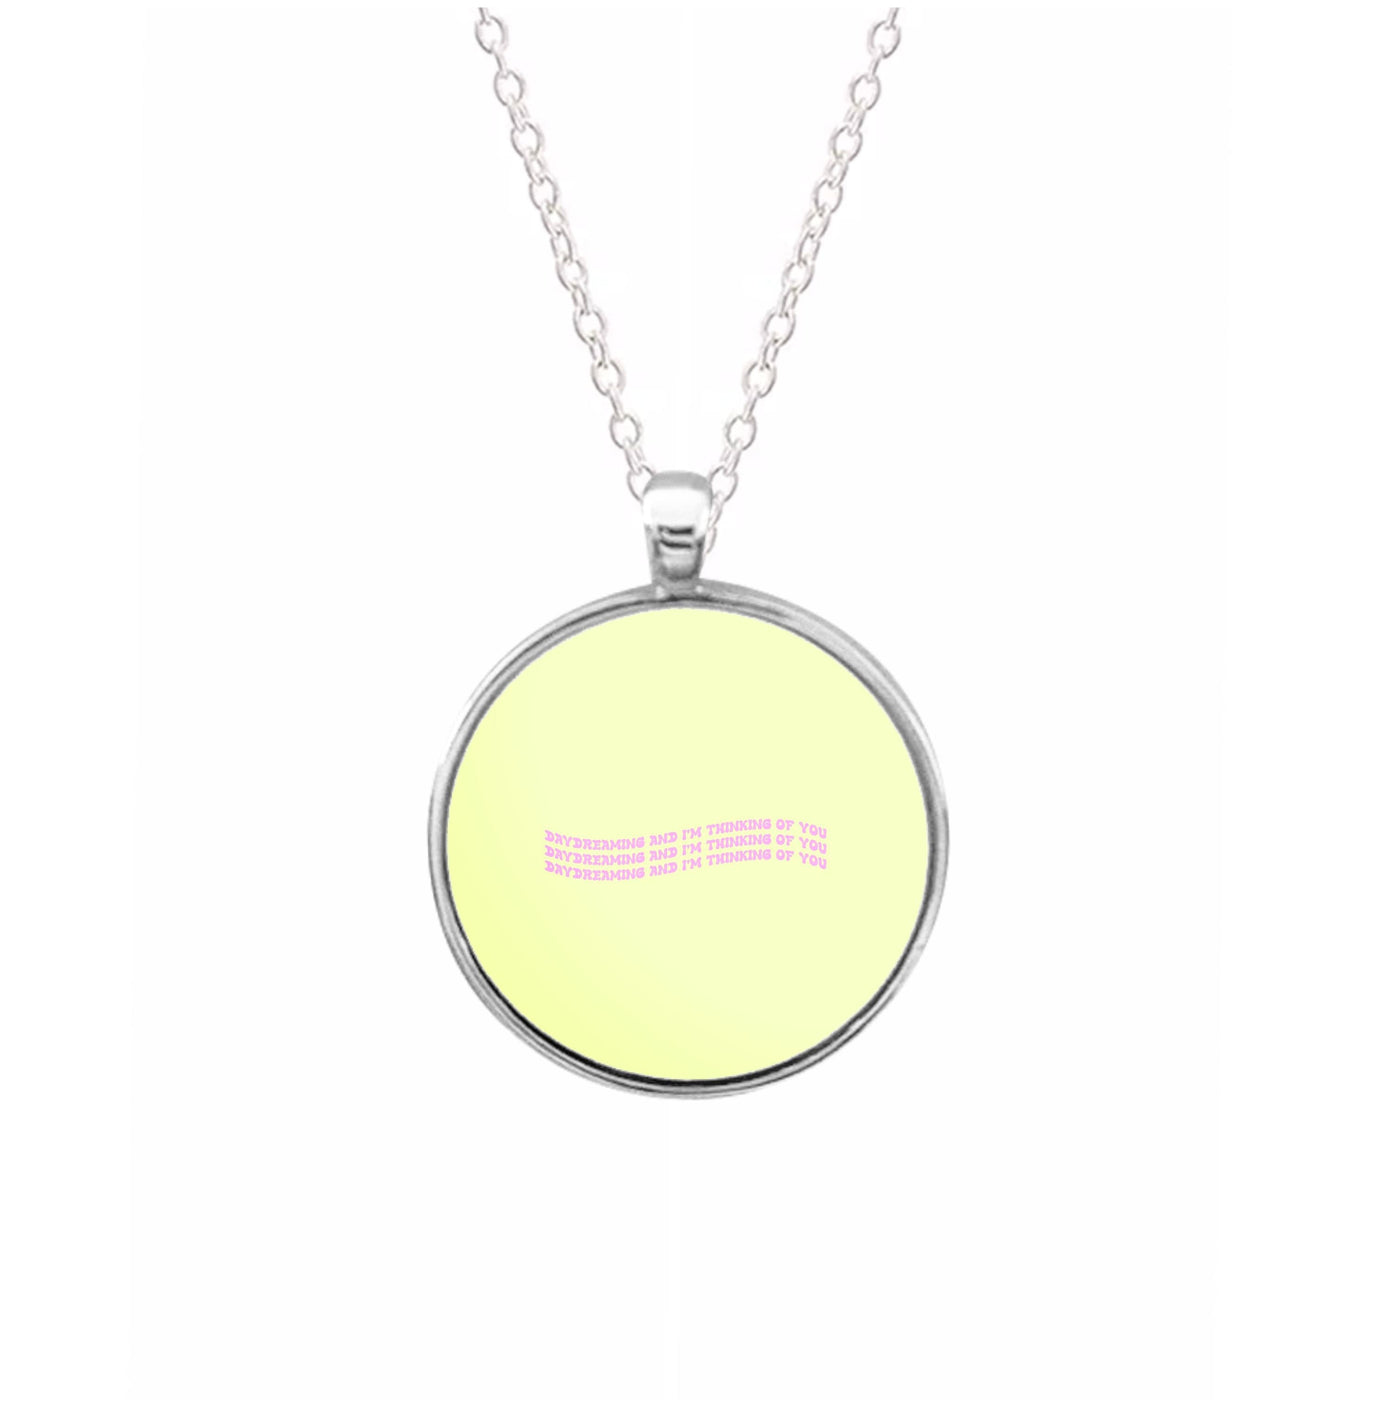 Daydreaming - Easylife Necklace